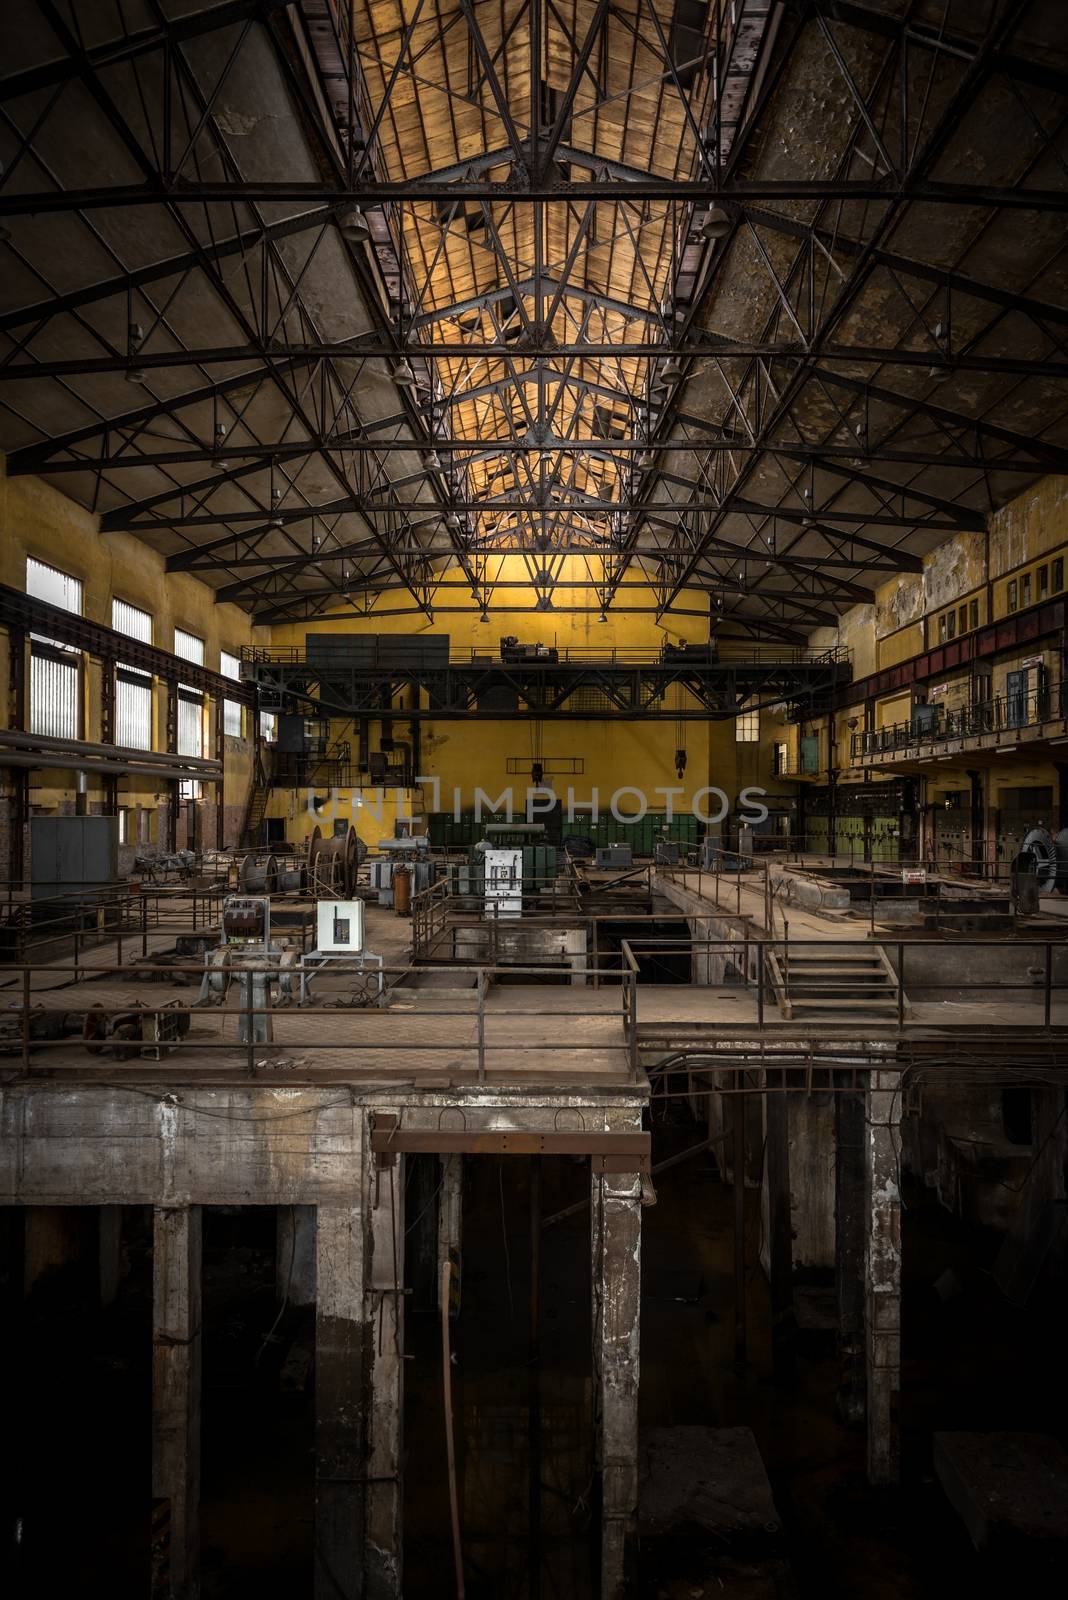 Electricity distribution hall at the metal industry